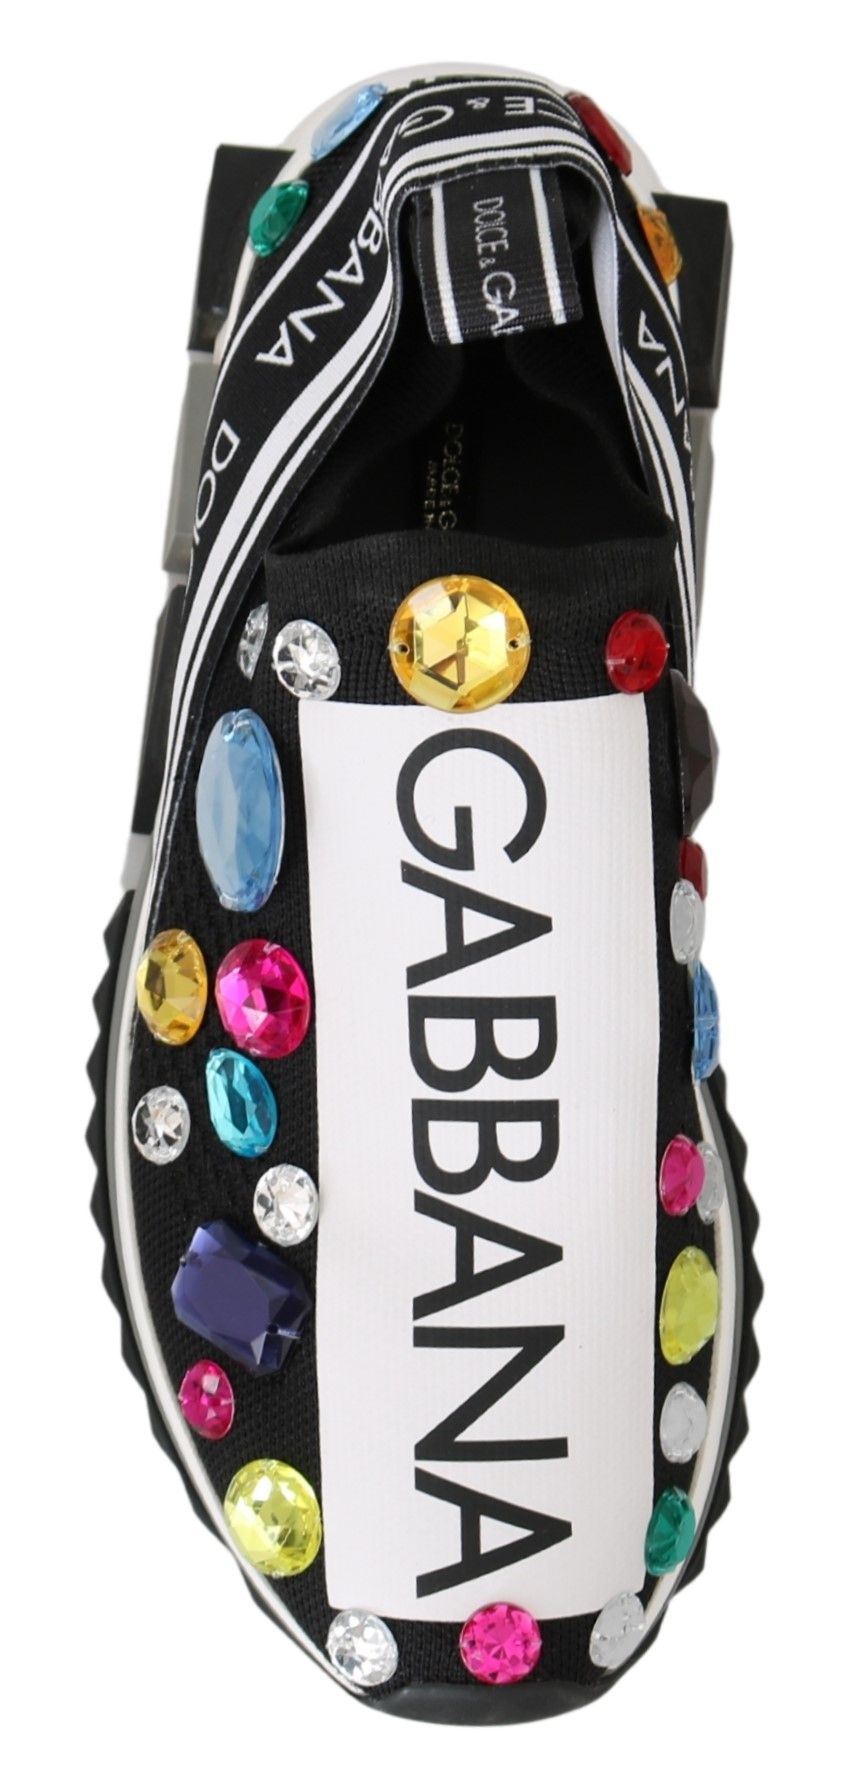 Dolce & Gabbana Black Multicolor Crystal Sneakers Shoes